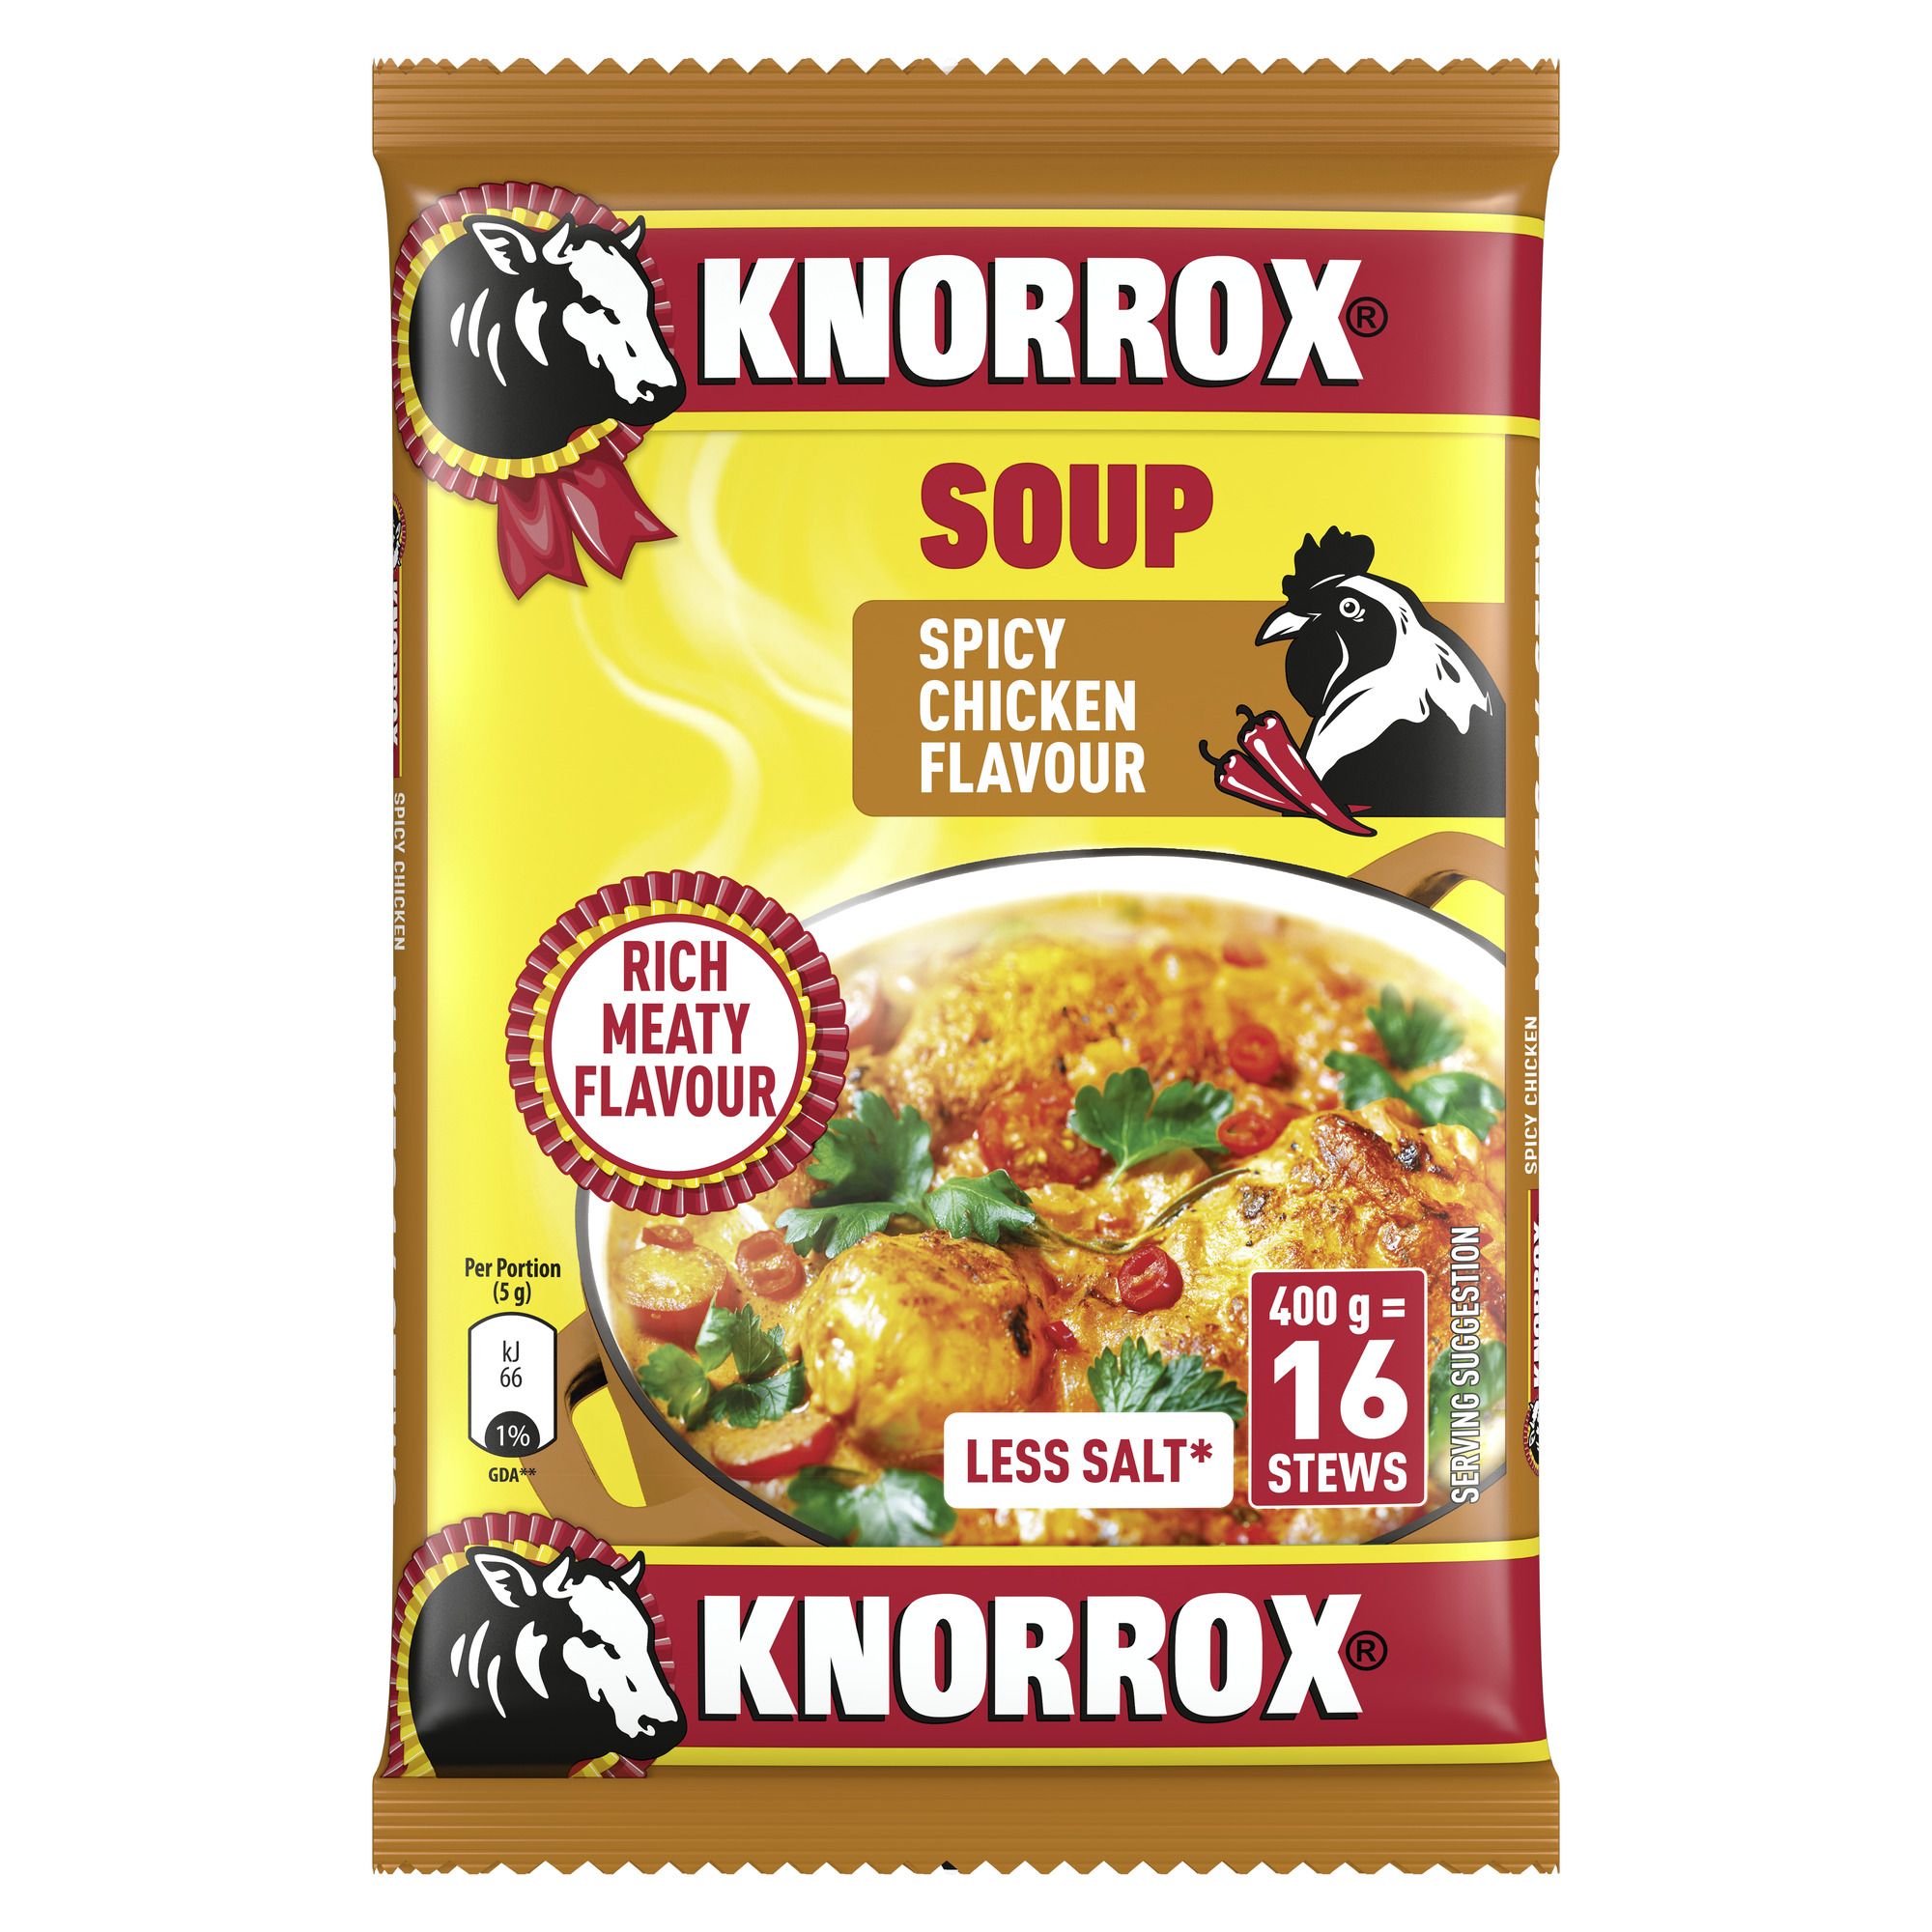 Knorrox Spicy Chicken Soup 400g